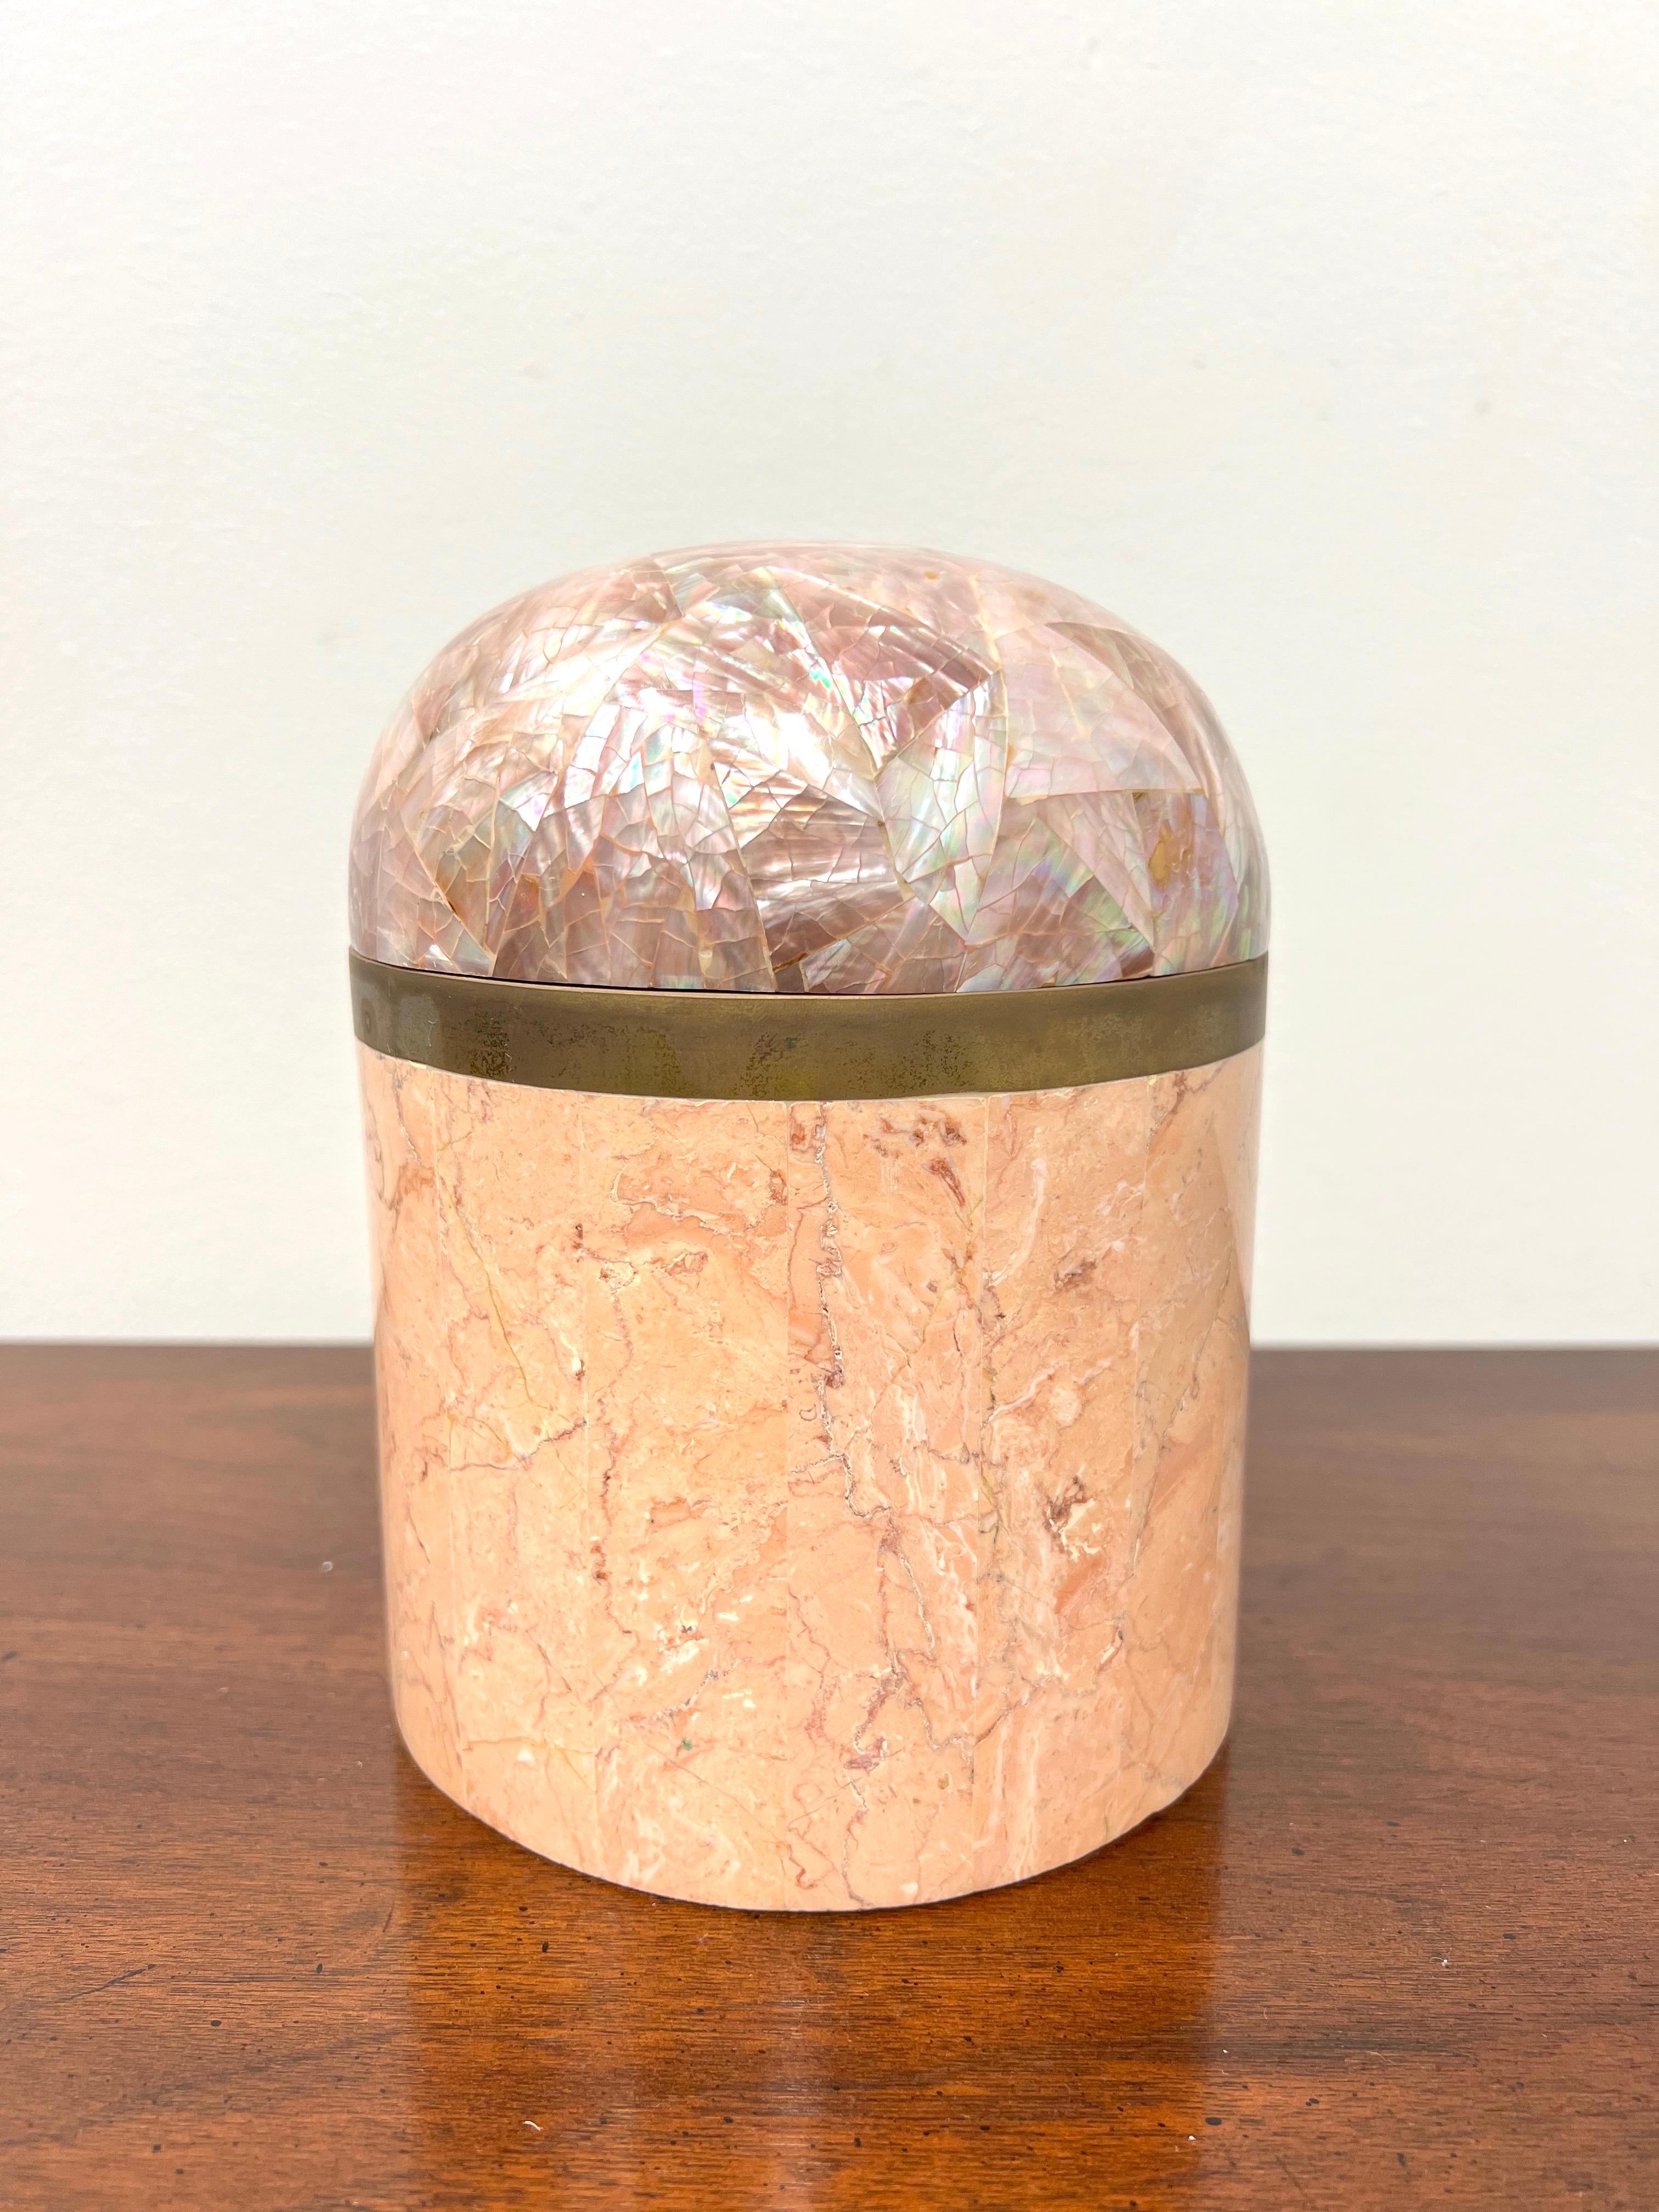 KINDER-HARRIS DARA 1980's Pink Tessellated Stone Round Box wth Dome Lid For Sale 1